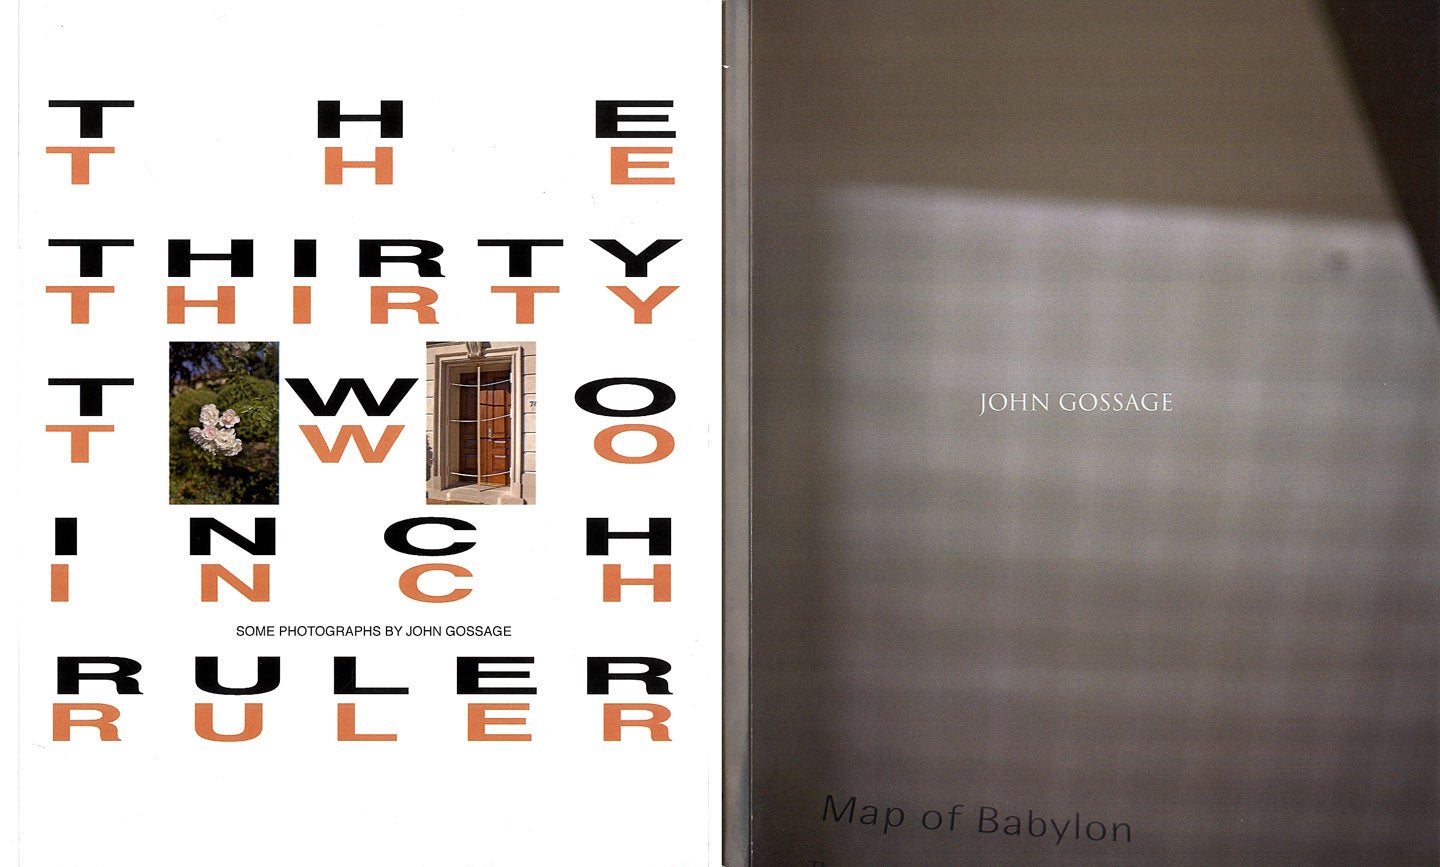 The Thirty Two Inch Ruler: Some Photographs by John Gossage & Map of Babylon ("Bootleg" Print-on-Demand Edition) [each SIGNED]